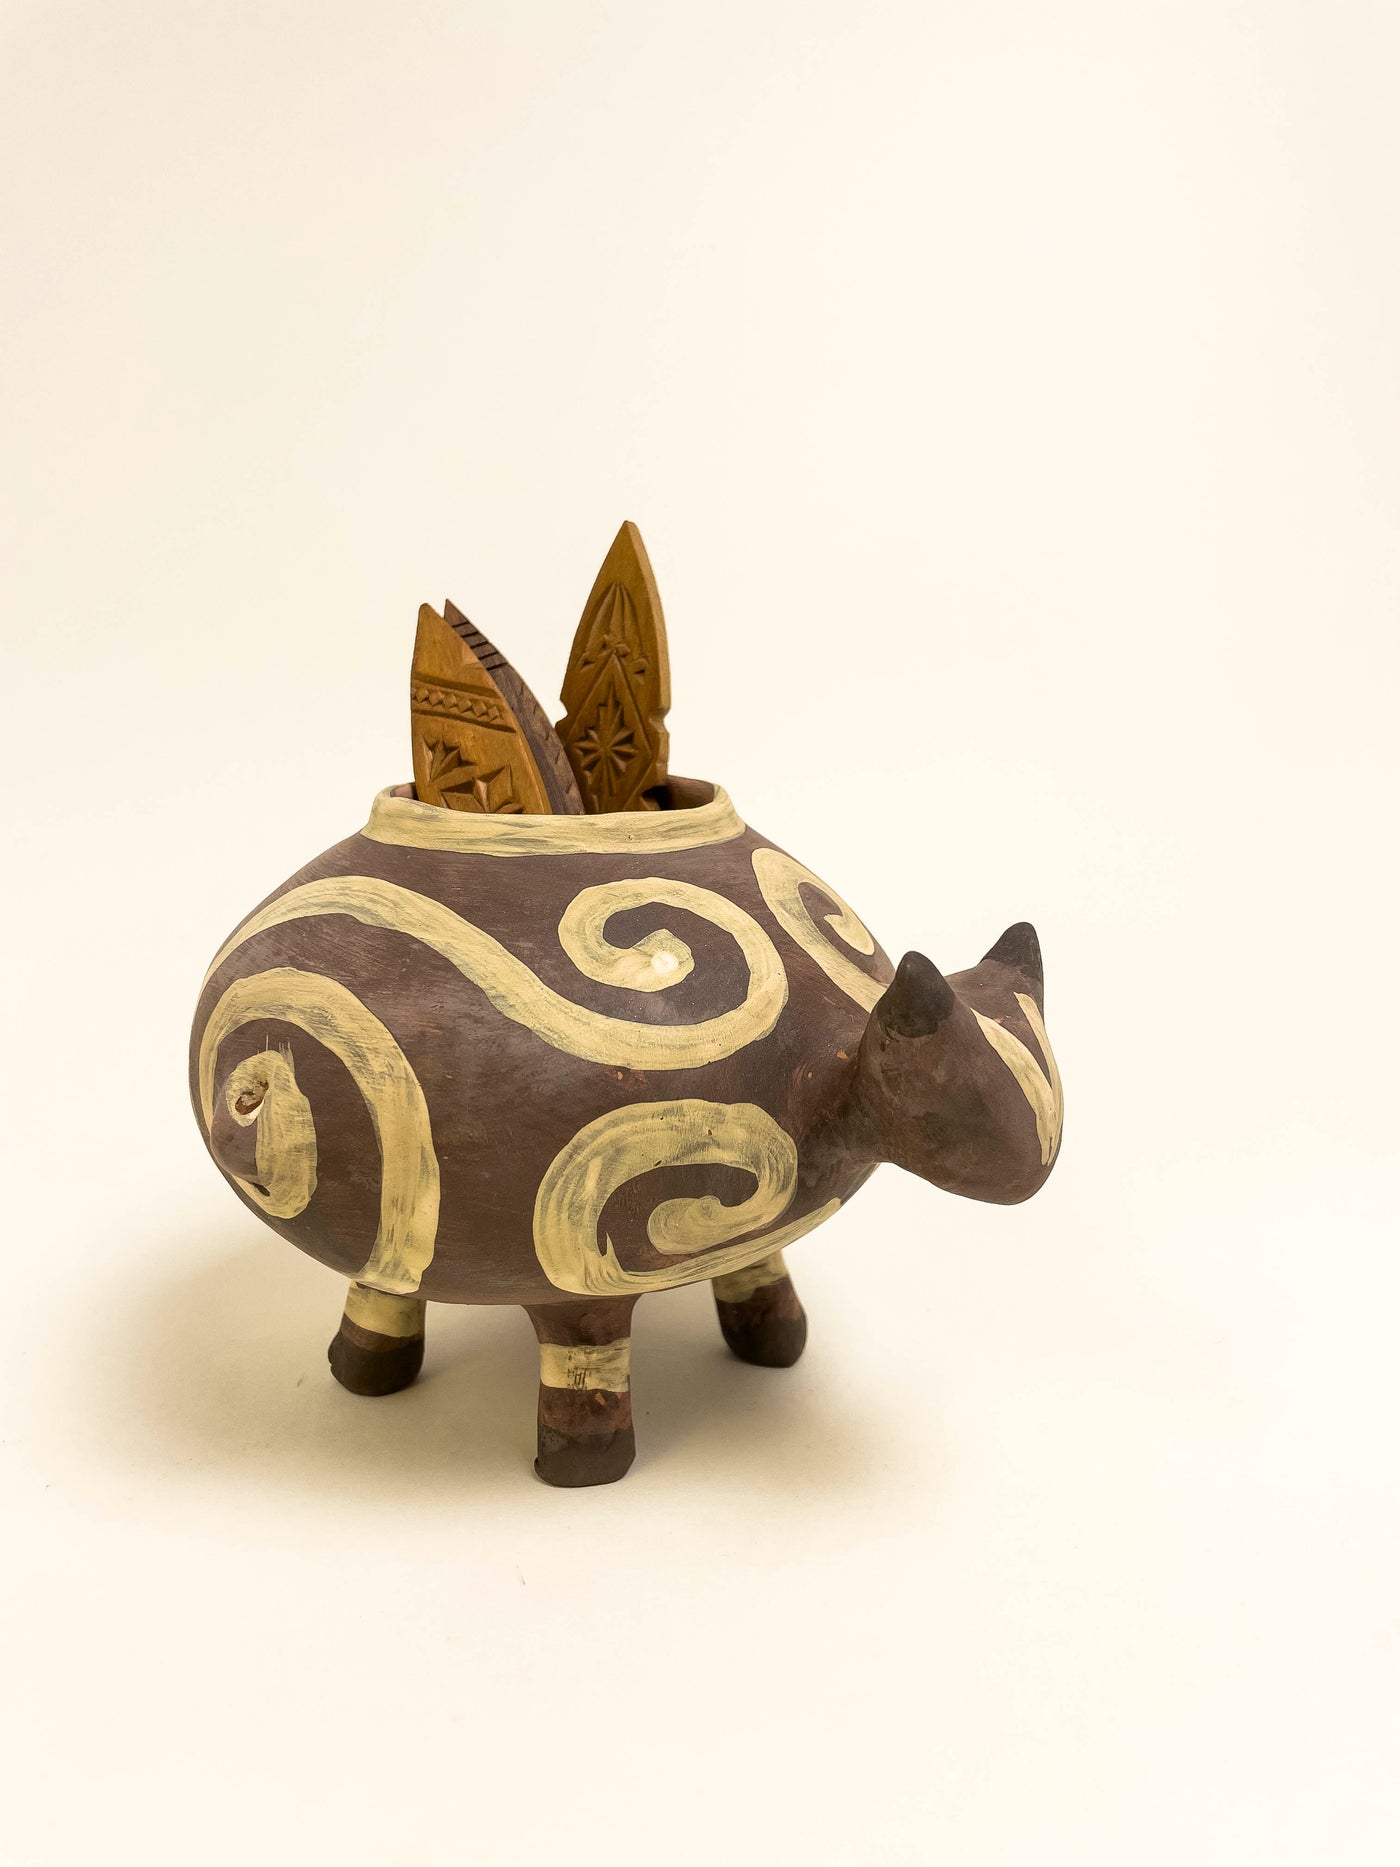 Decorative Ceramic Bowl in the Shape of a Cow - Brown with Spiral Pattern